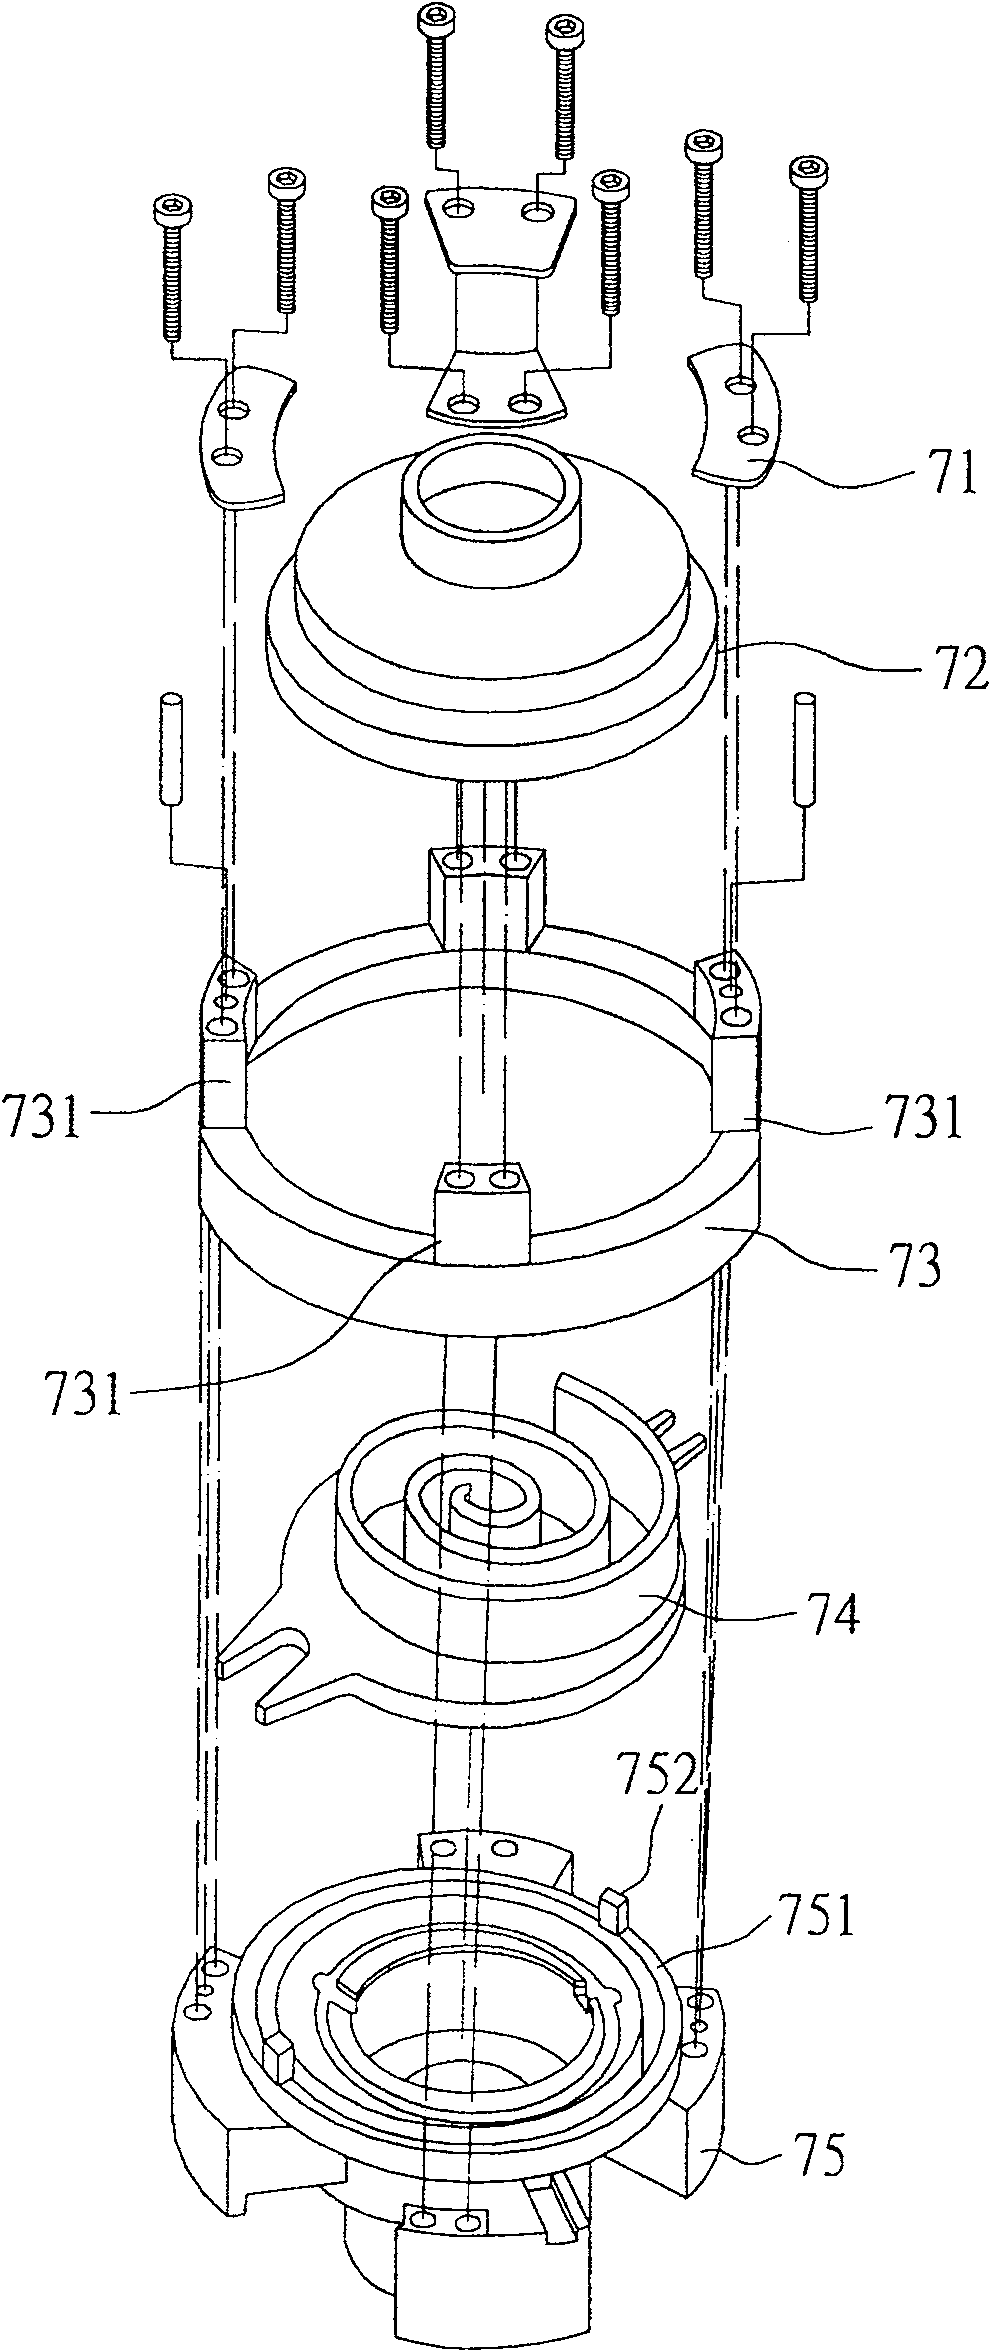 Scroller with axial gap control function